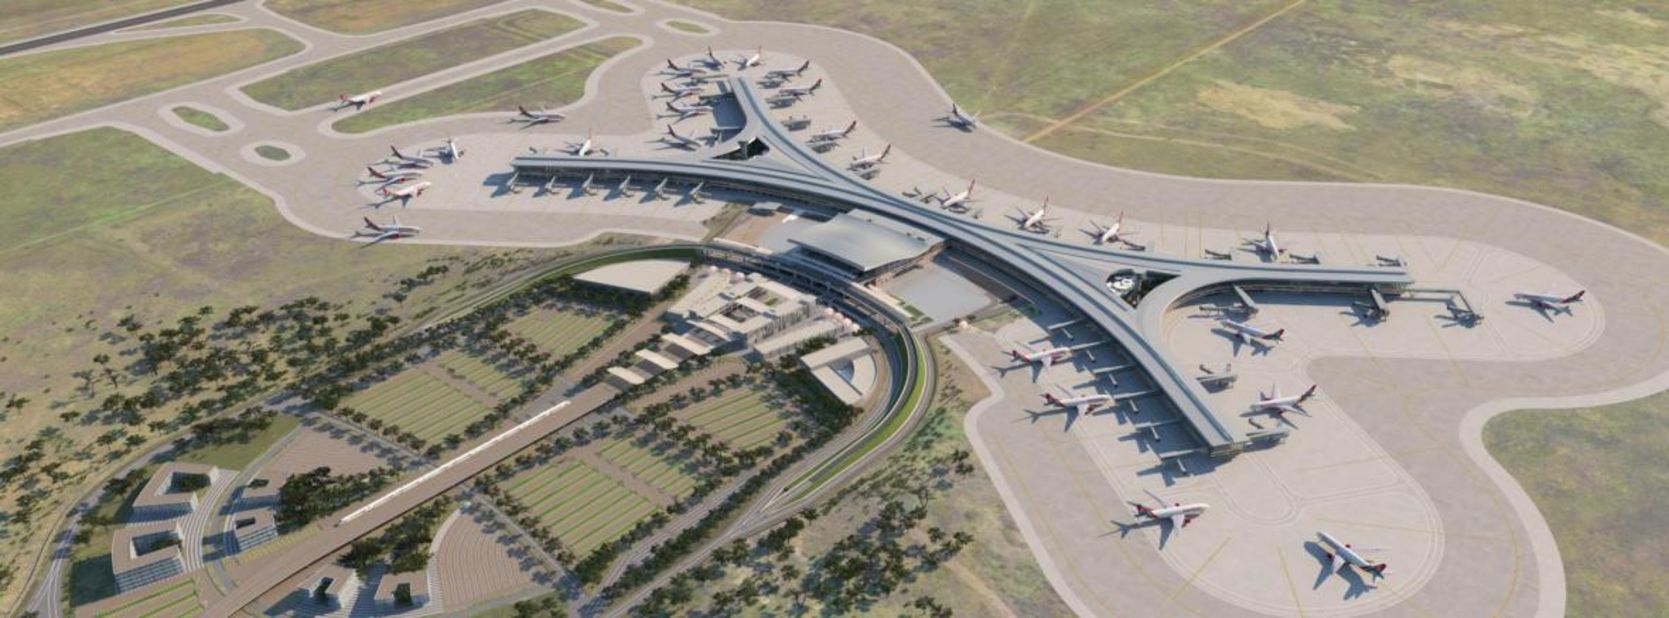 Jomo Kenyatta International -- Kenya's premier airport -- is to receive multiple upgrades. <br /><br />A new greenfield terminal designed by architects <a href="http://www.pascalls.co.uk/projects/aviation/jomo-kenyatta-international-airport-greenfield-terminal/" target="_blank" target="_blank">Pascall + Watson</a> will be the largest in Africa when it opens in 2017, serving 20 million passengers a year, at a cost of around $650 million. <br /><br />A second runway will be inaugurated the same year. 